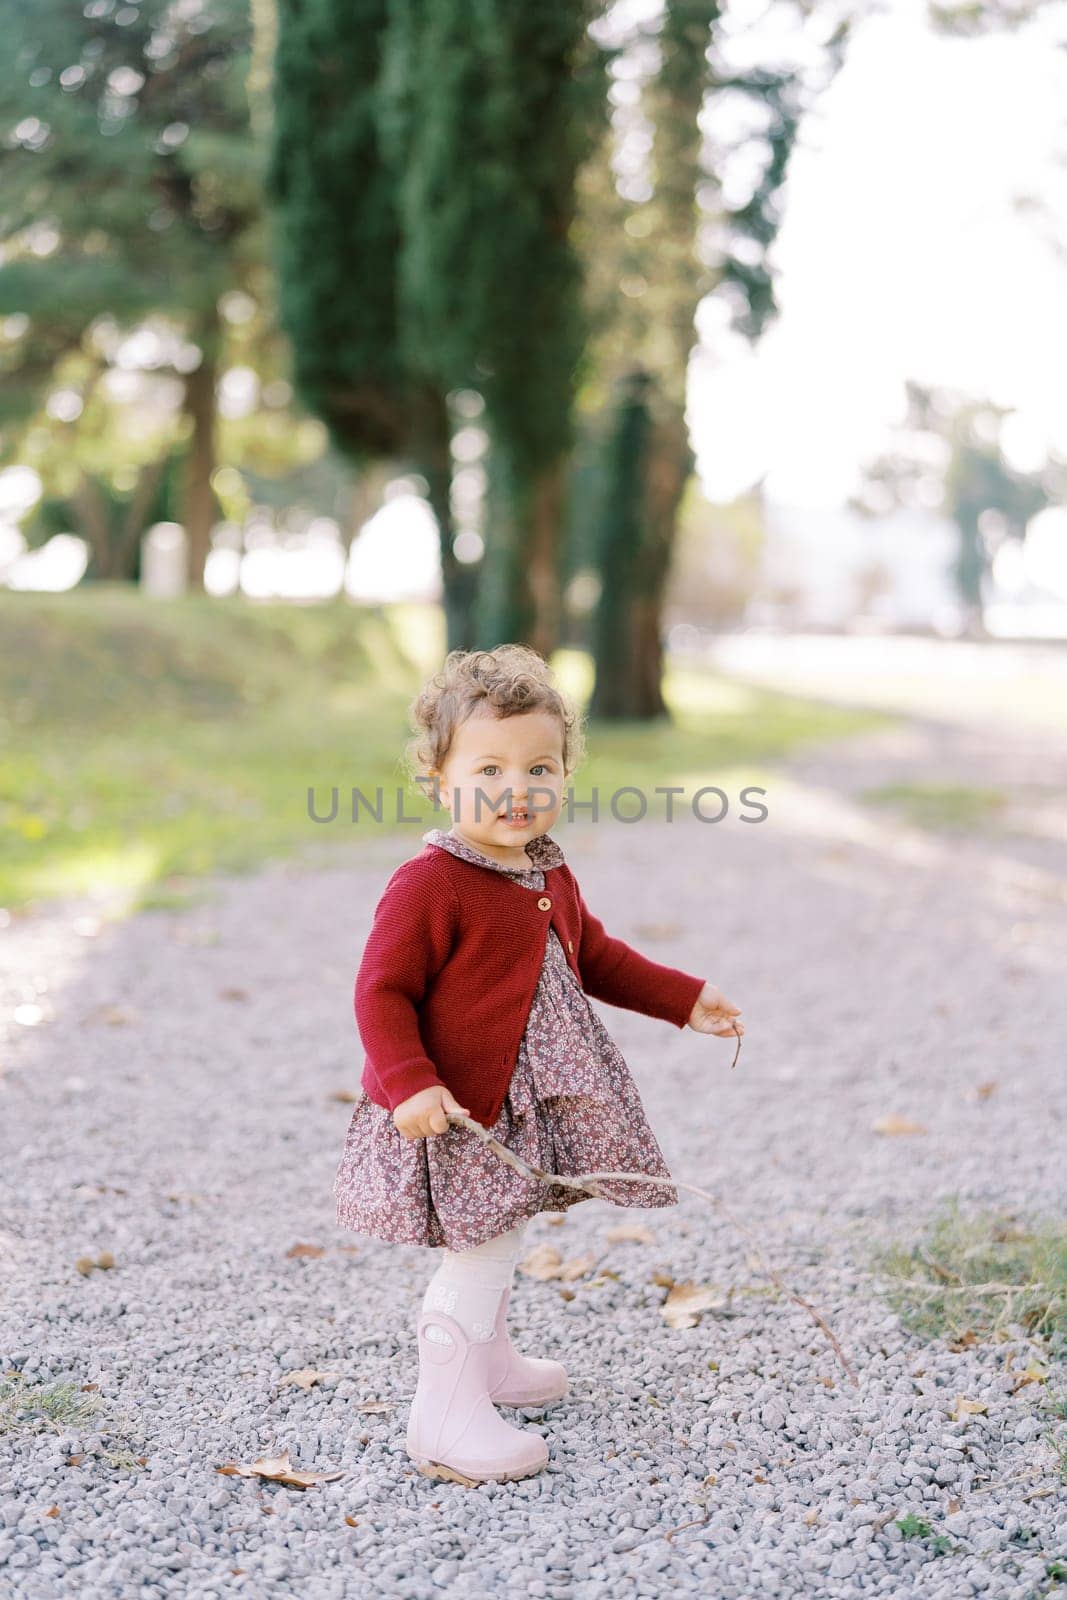 Little girl with a stick in her hand stands on a gravel path in the autumn forest. High quality photo